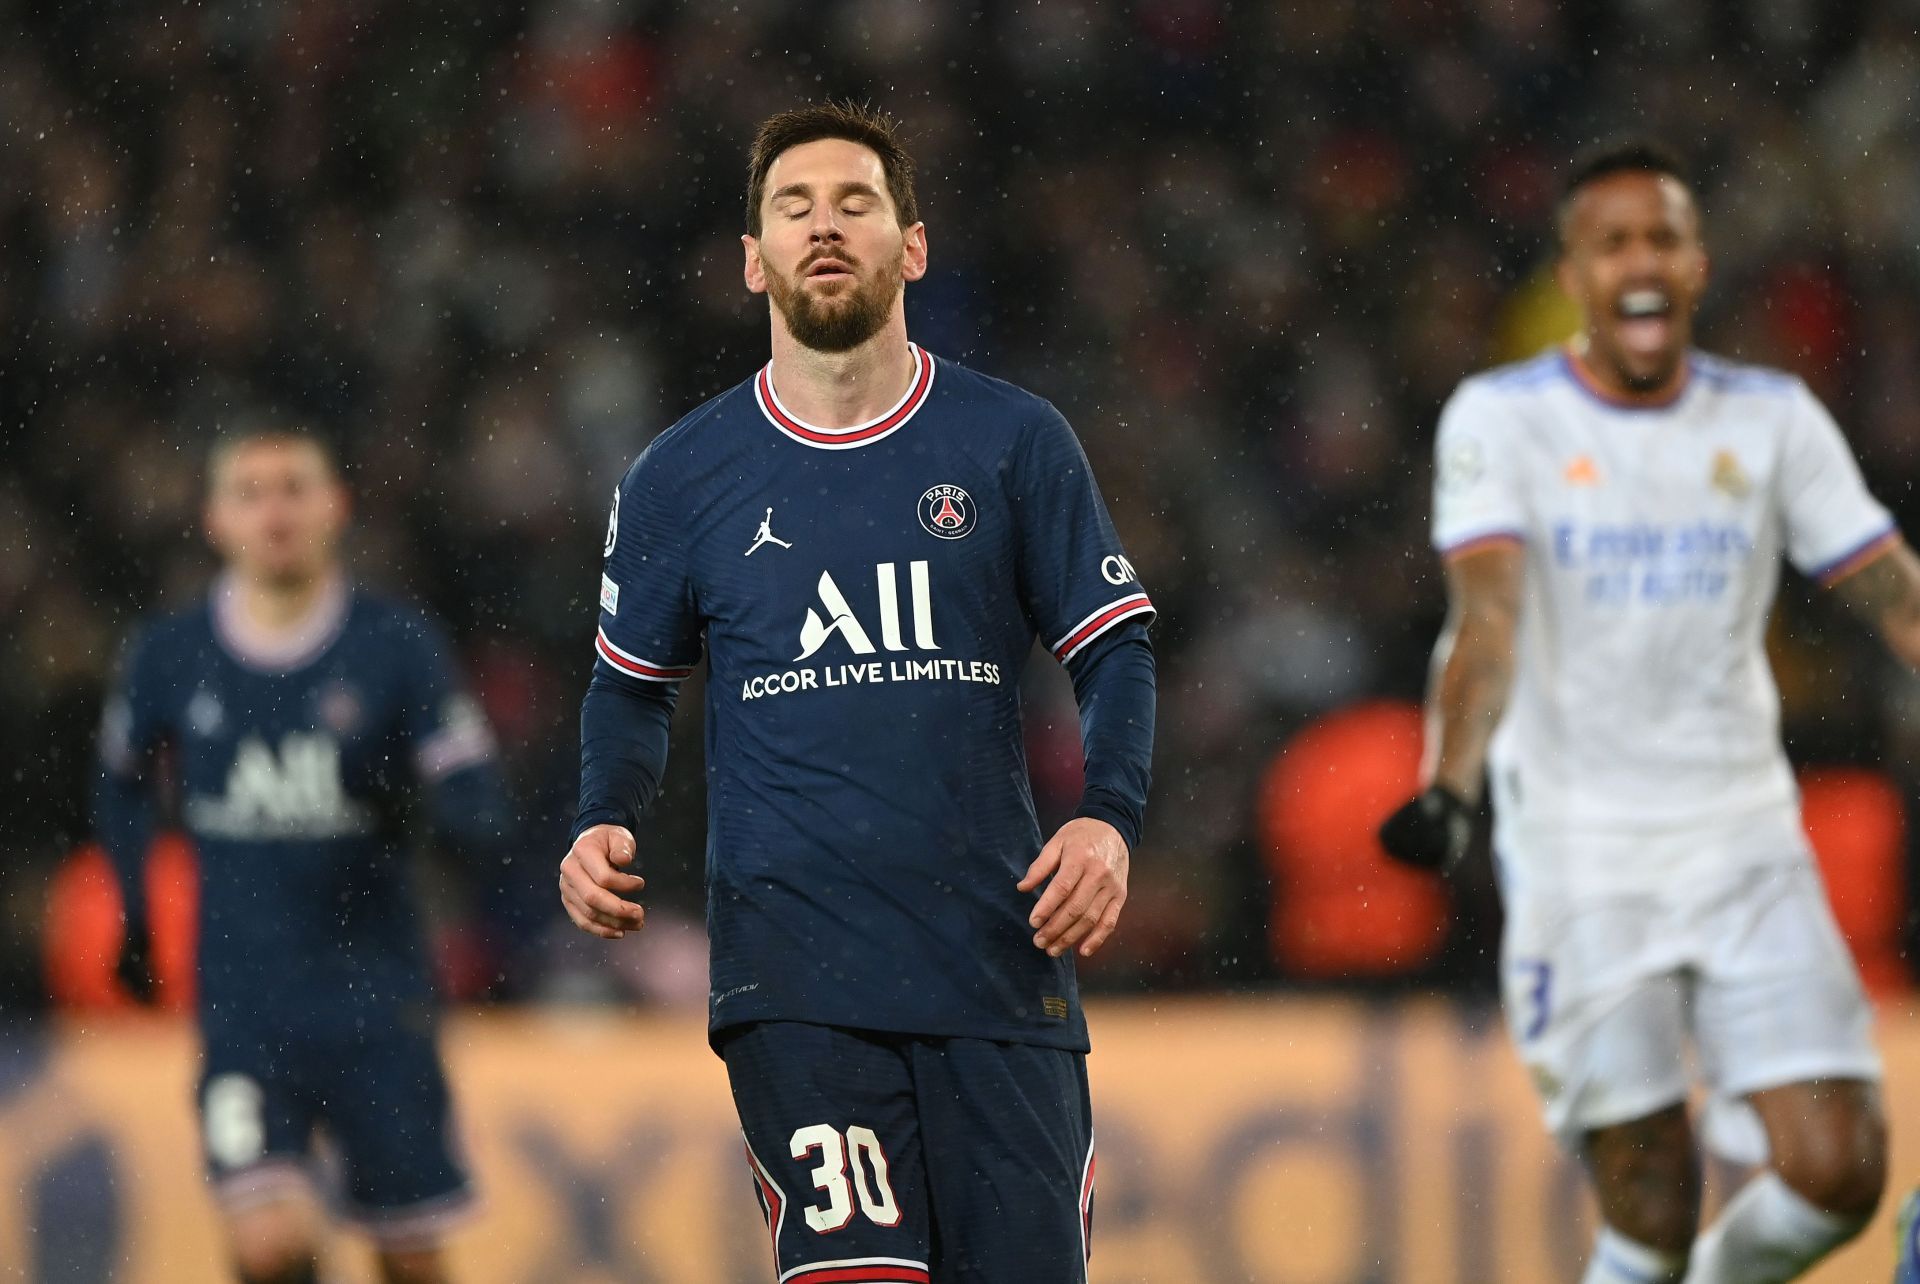 Lionel Messi has endured a difficult time since joining PSG